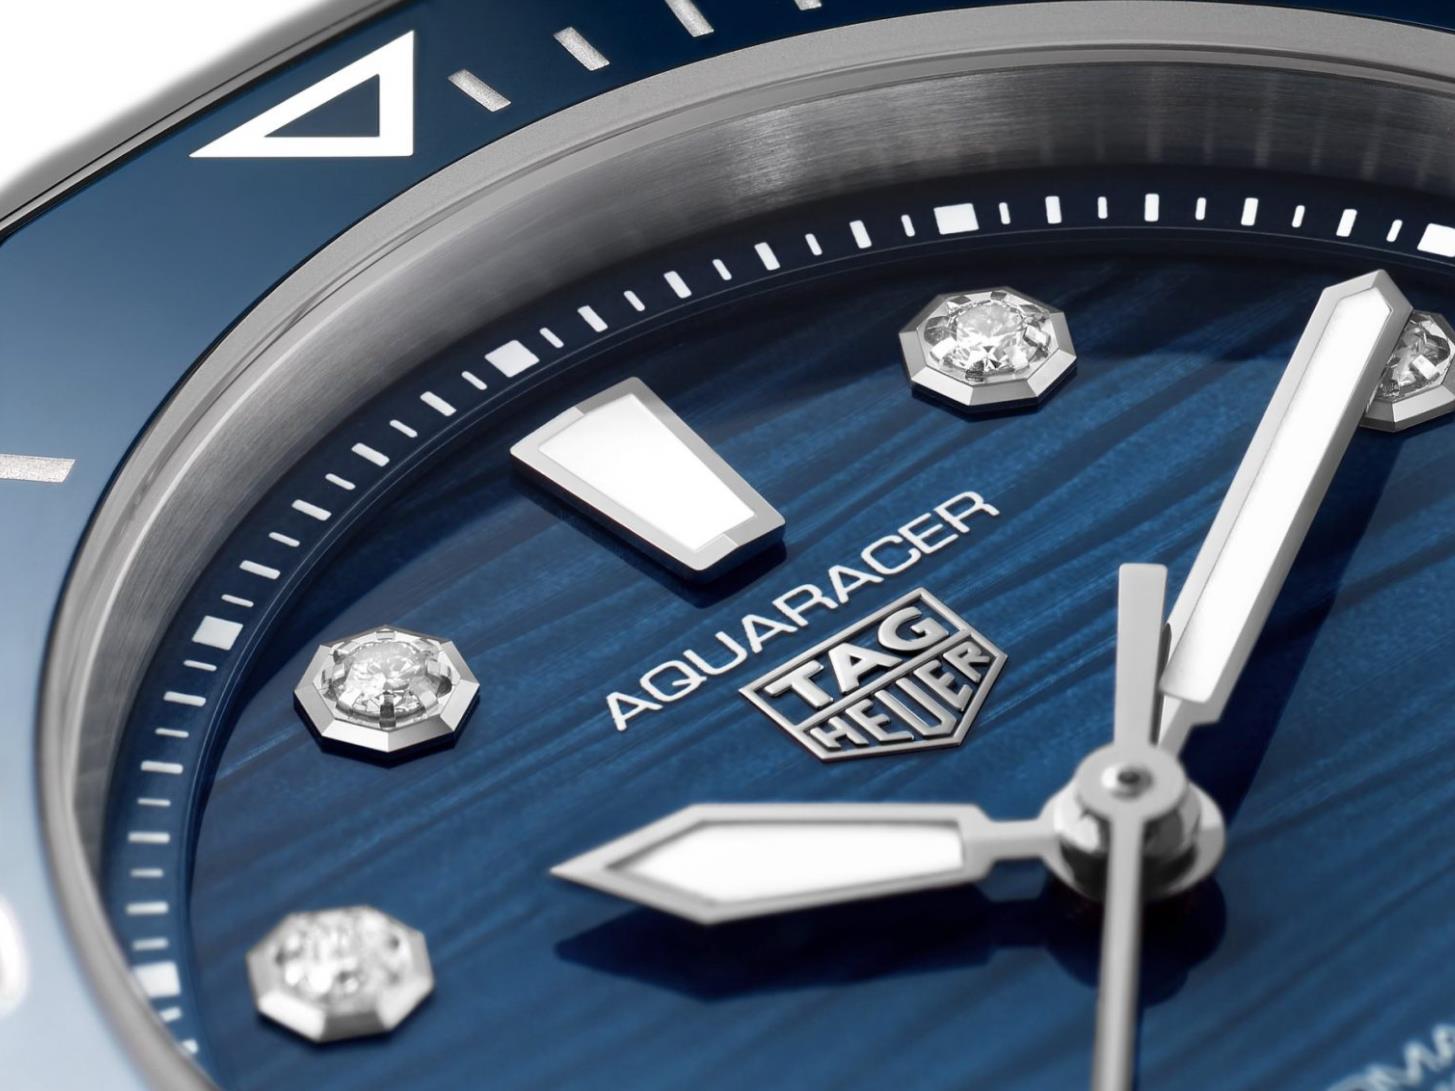 The blue dial fake watch has diamond hour marks.